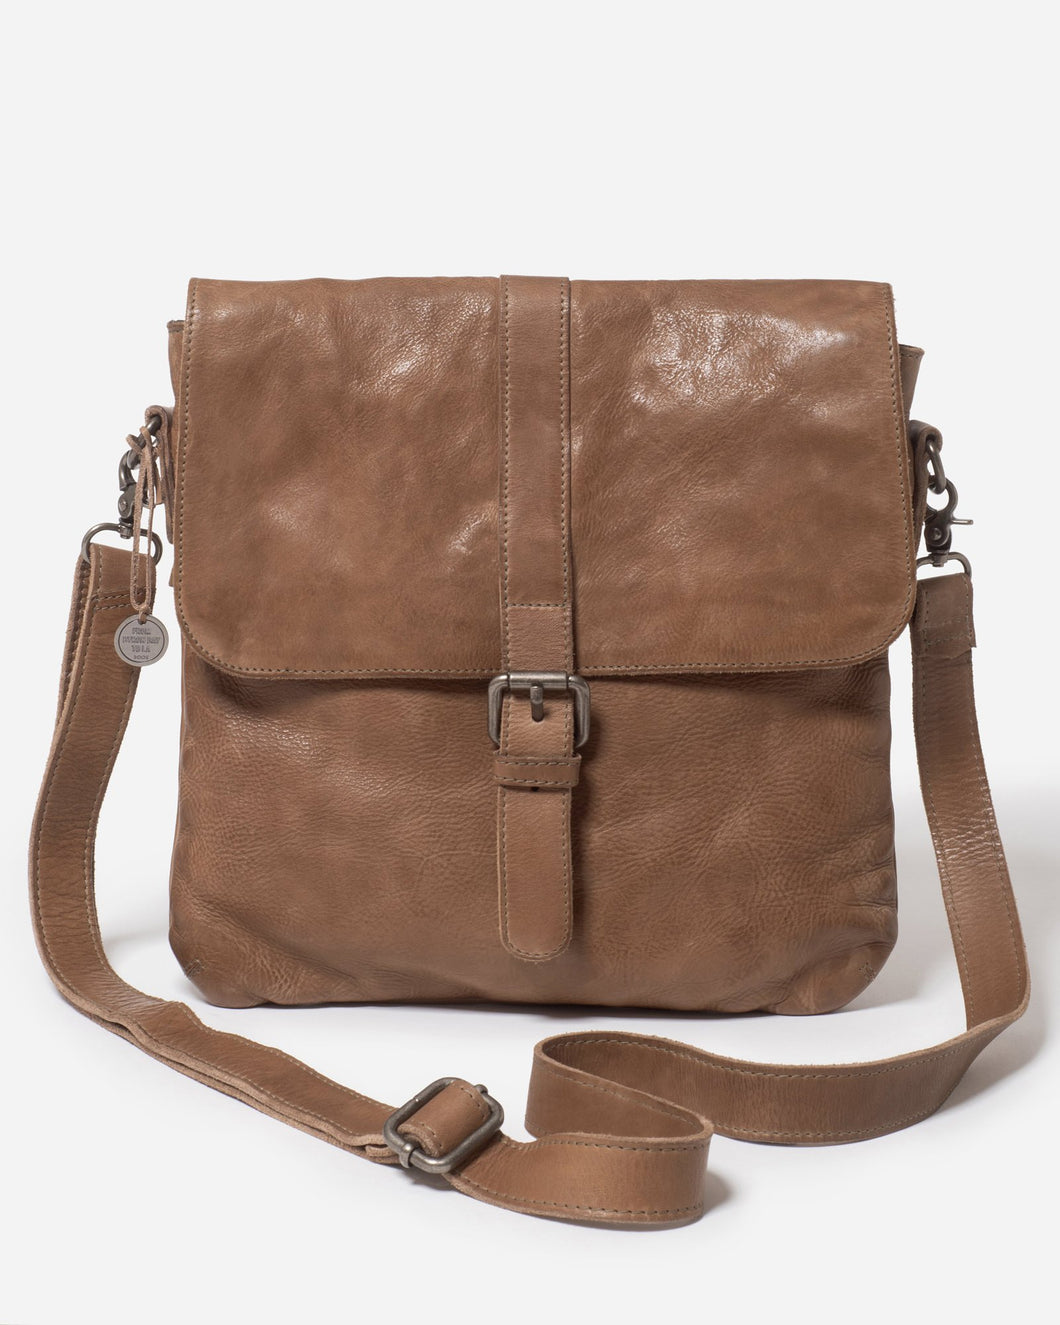 Stitch and Hide - Berlin Leather Bag